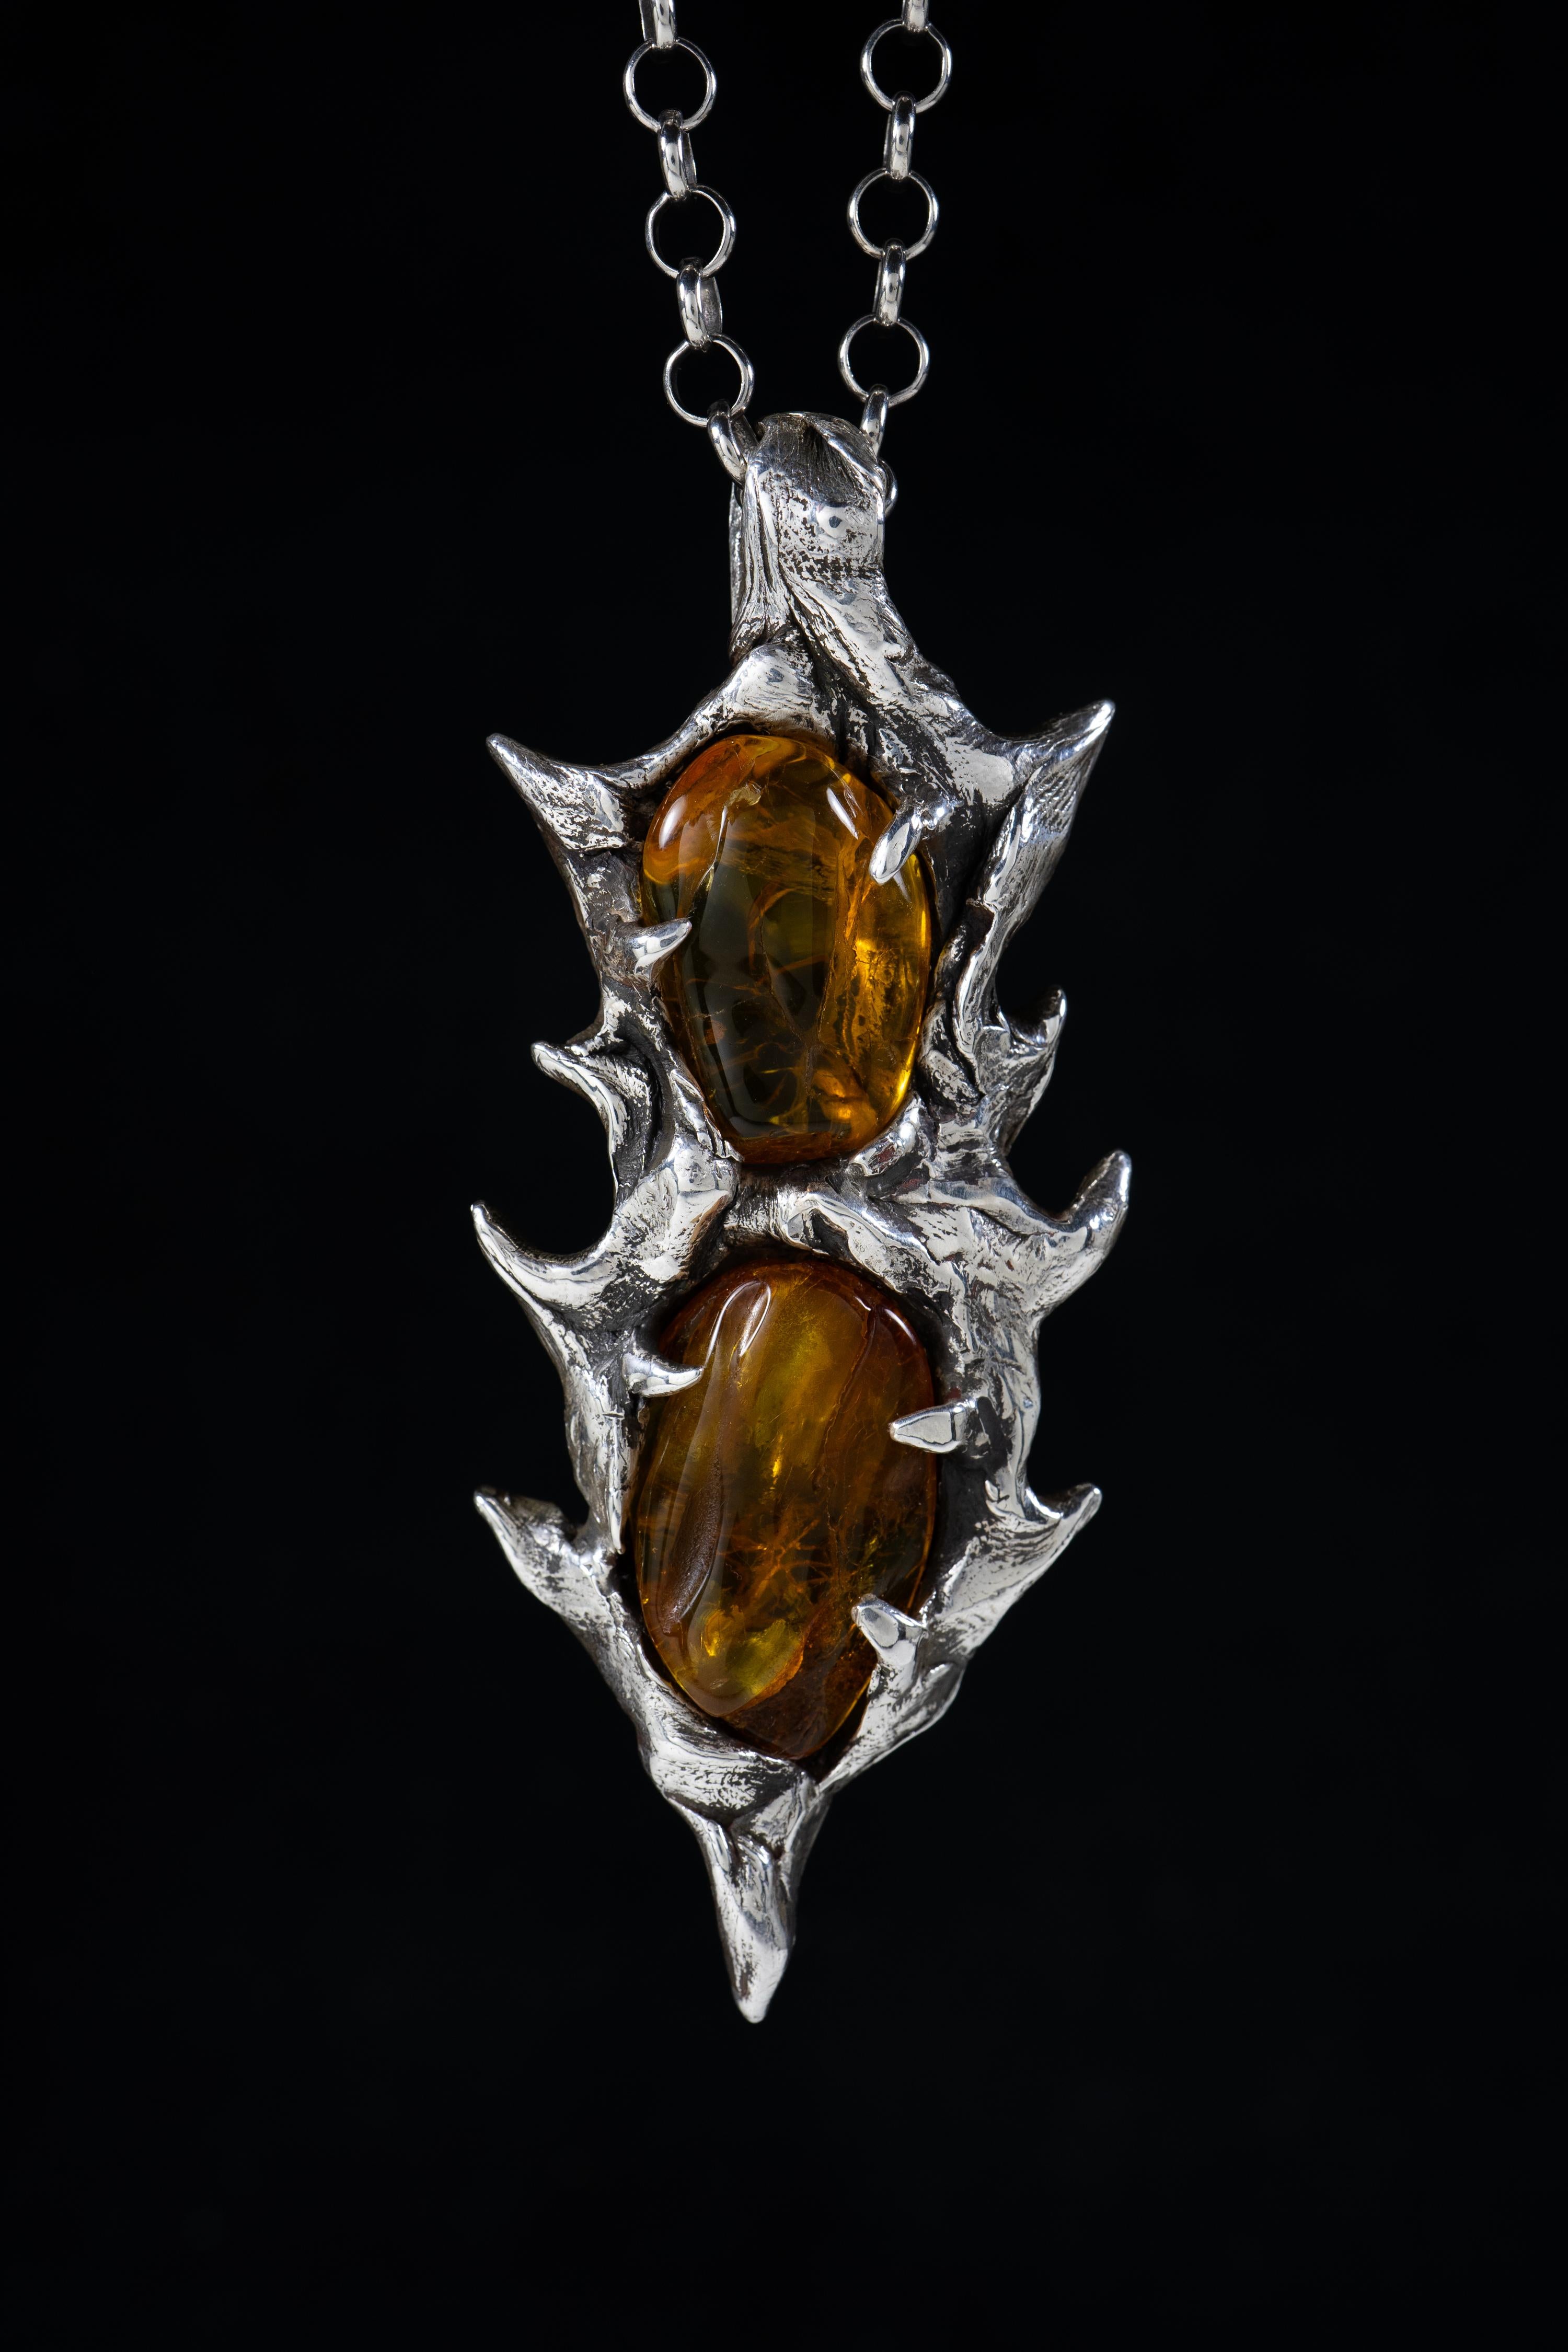 Spear of Immortality is a one-of-a-kind pendant by Ken Fury that is hand-carved and cast in sterling silver with natural Baltic Amber stones from Poland.

Size of piece: 92mm x 37mm

Hand-signed.

A 24-inch sterling silver chain is available as an